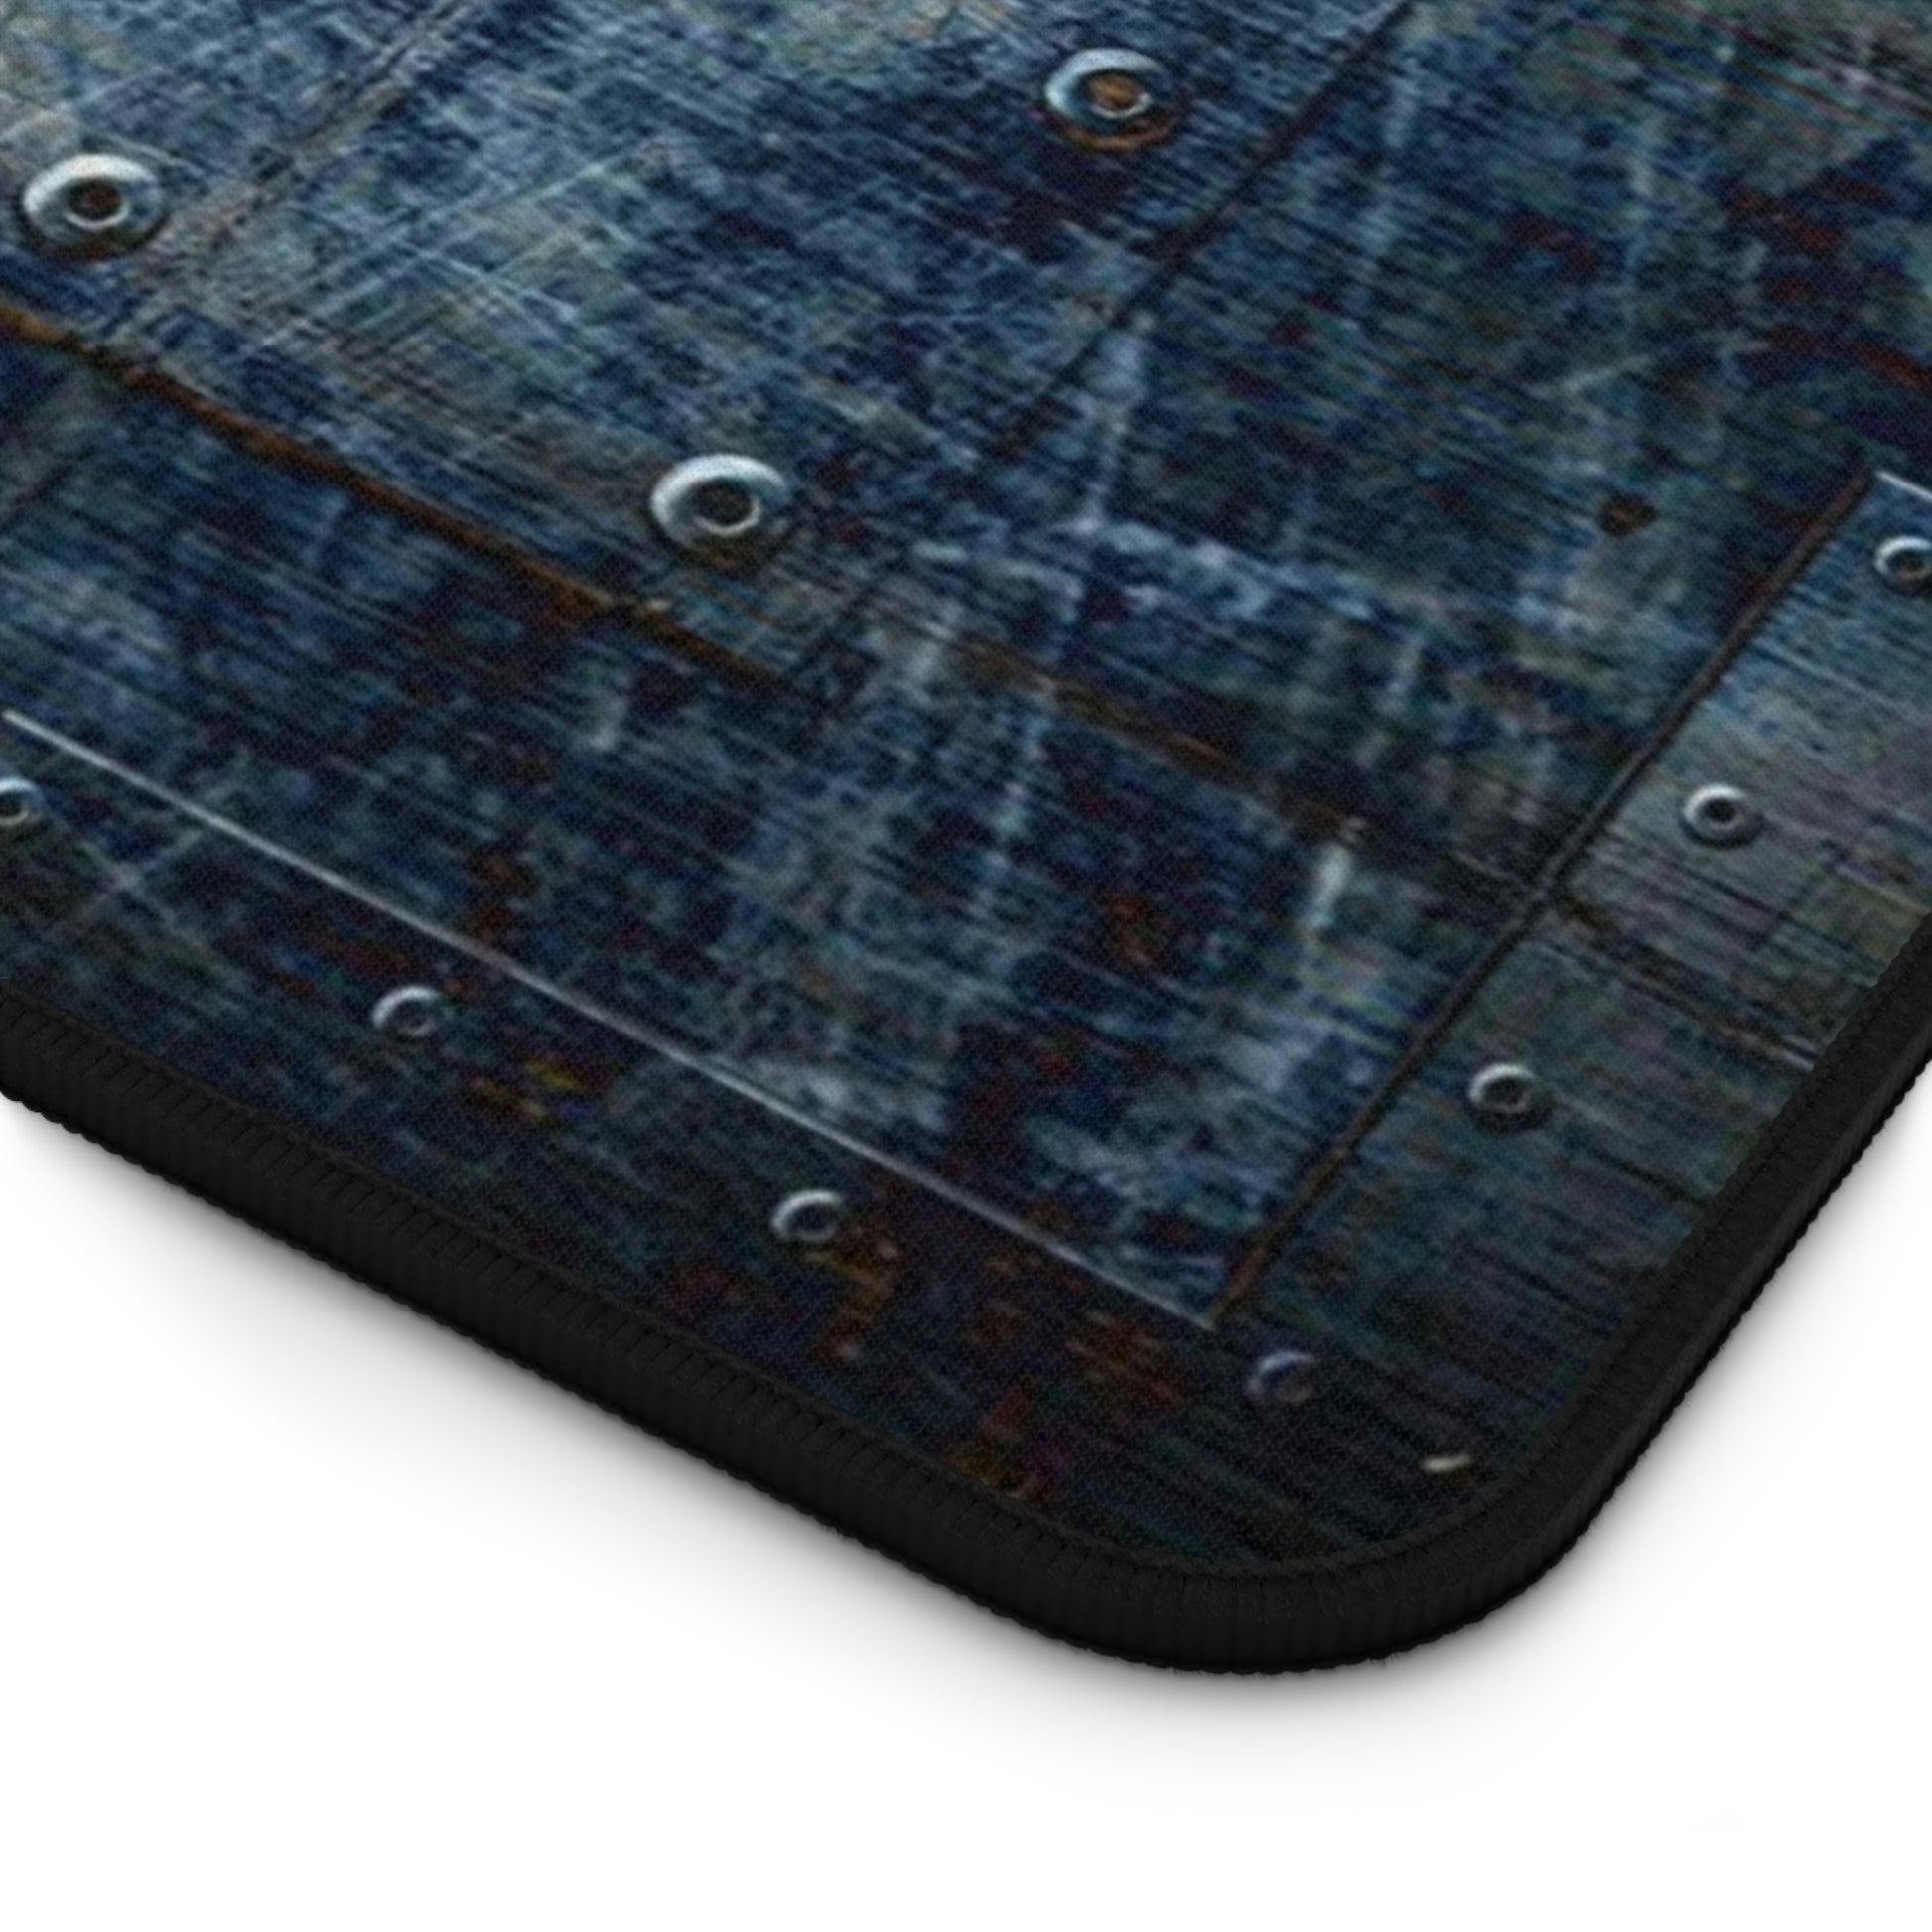 Steampunk Themed Desk Accessories - Distressed, Blued Steel Sheets on Neoprene Desk Mat 15.5 by 31 close up